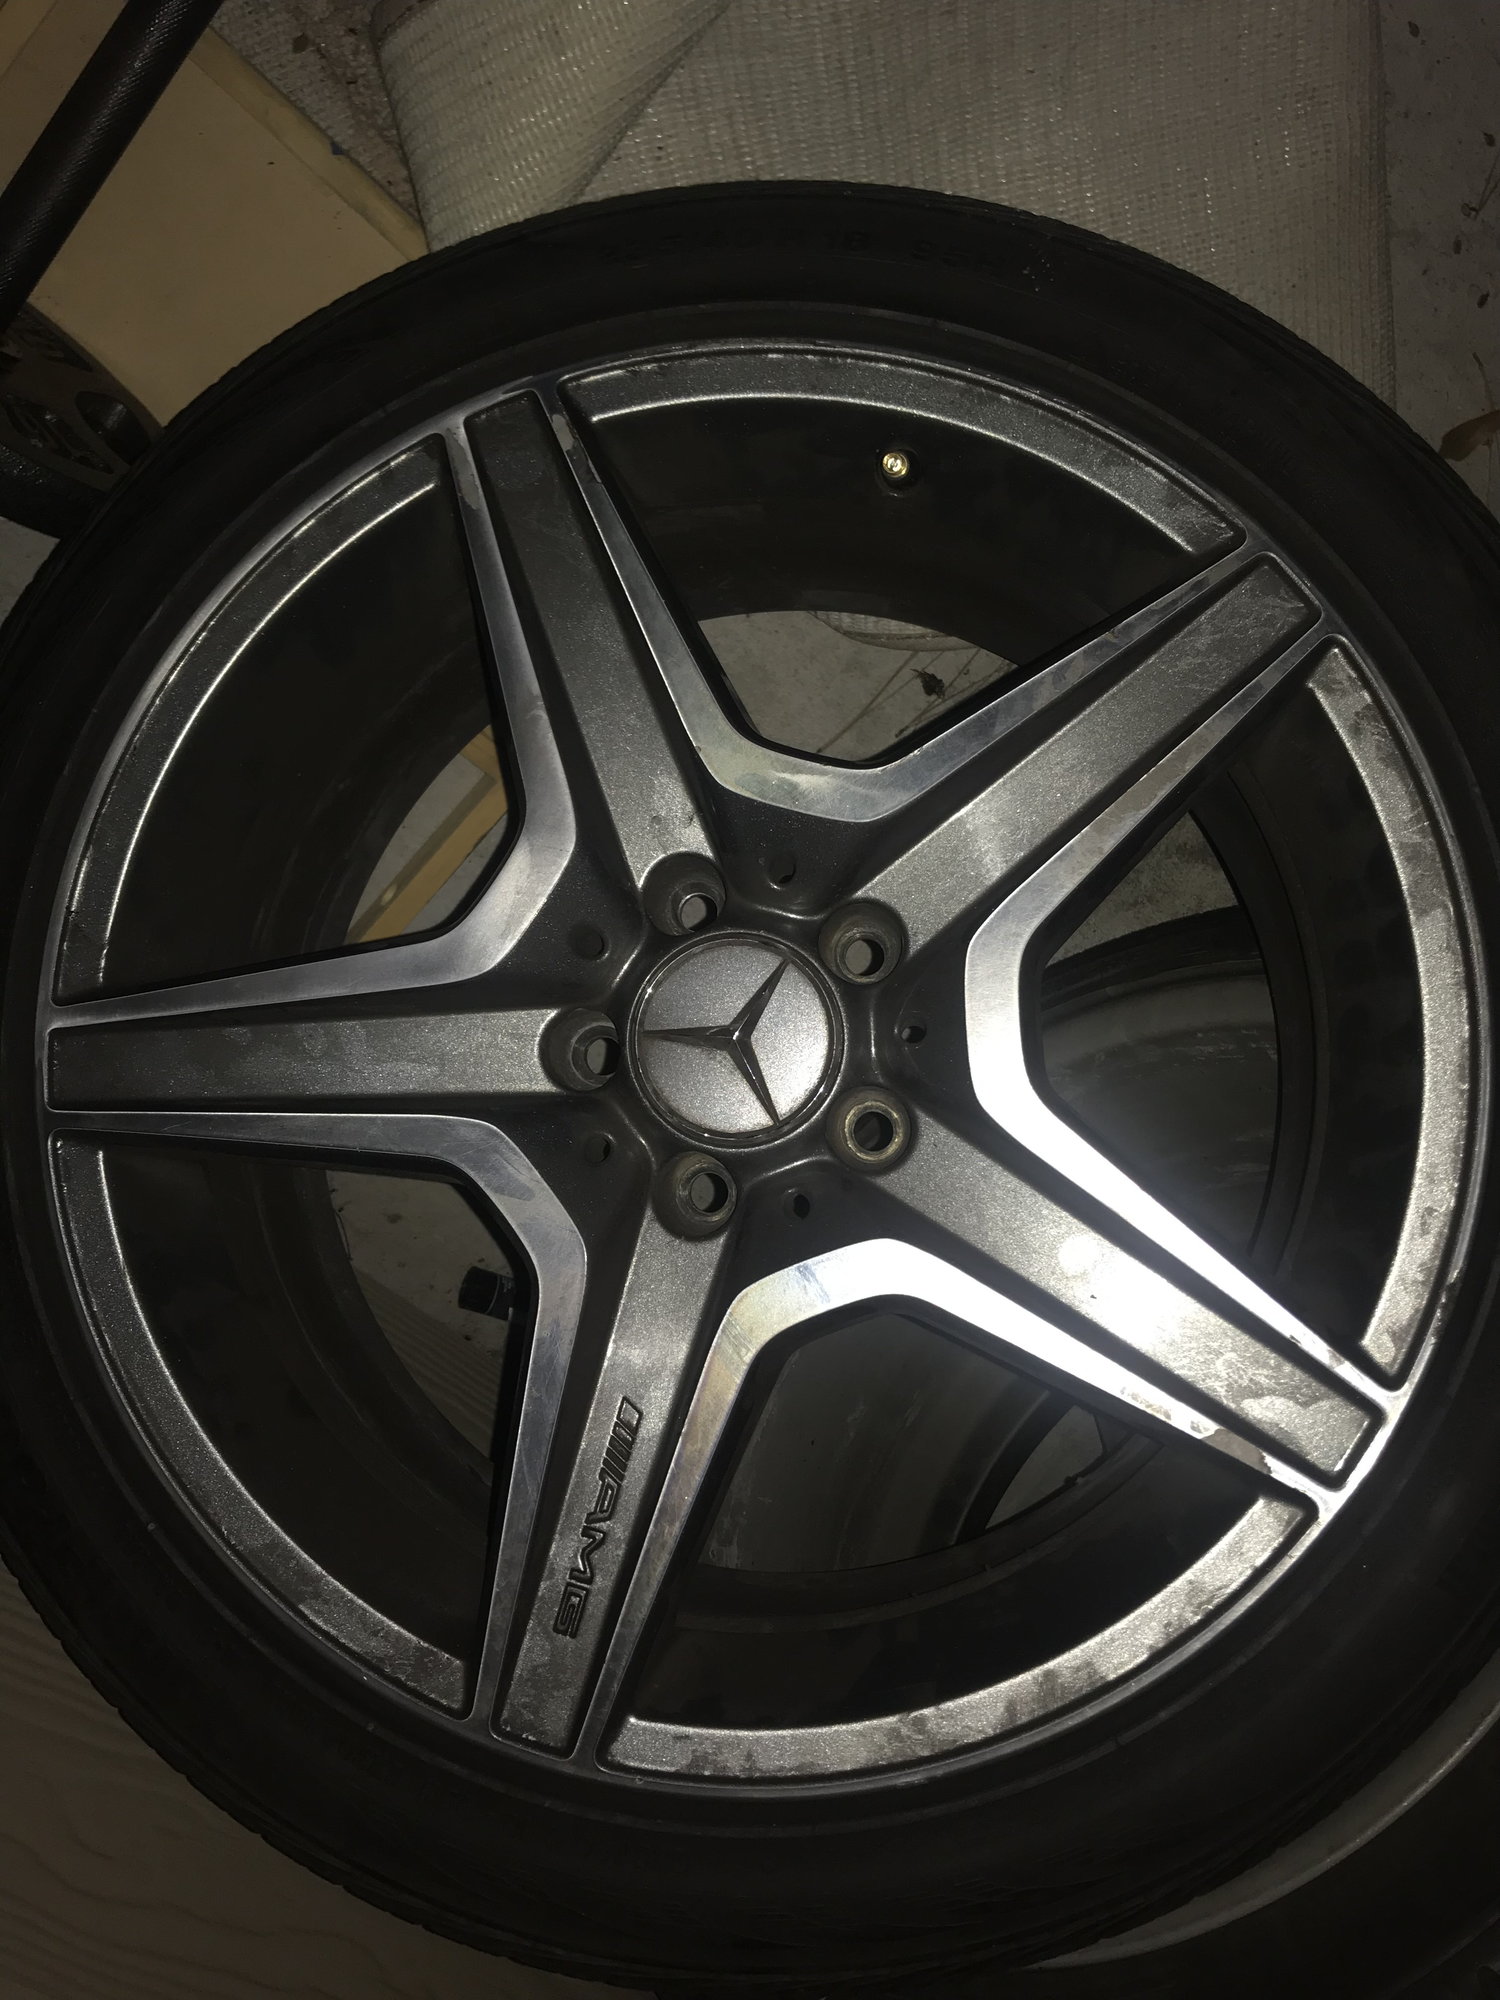 Wheels and Tires/Axles - 3 original AMG rims/tires - Used - 2008 to 2014 Mercedes-Benz C63 AMG - Houston, TX 77040, United States